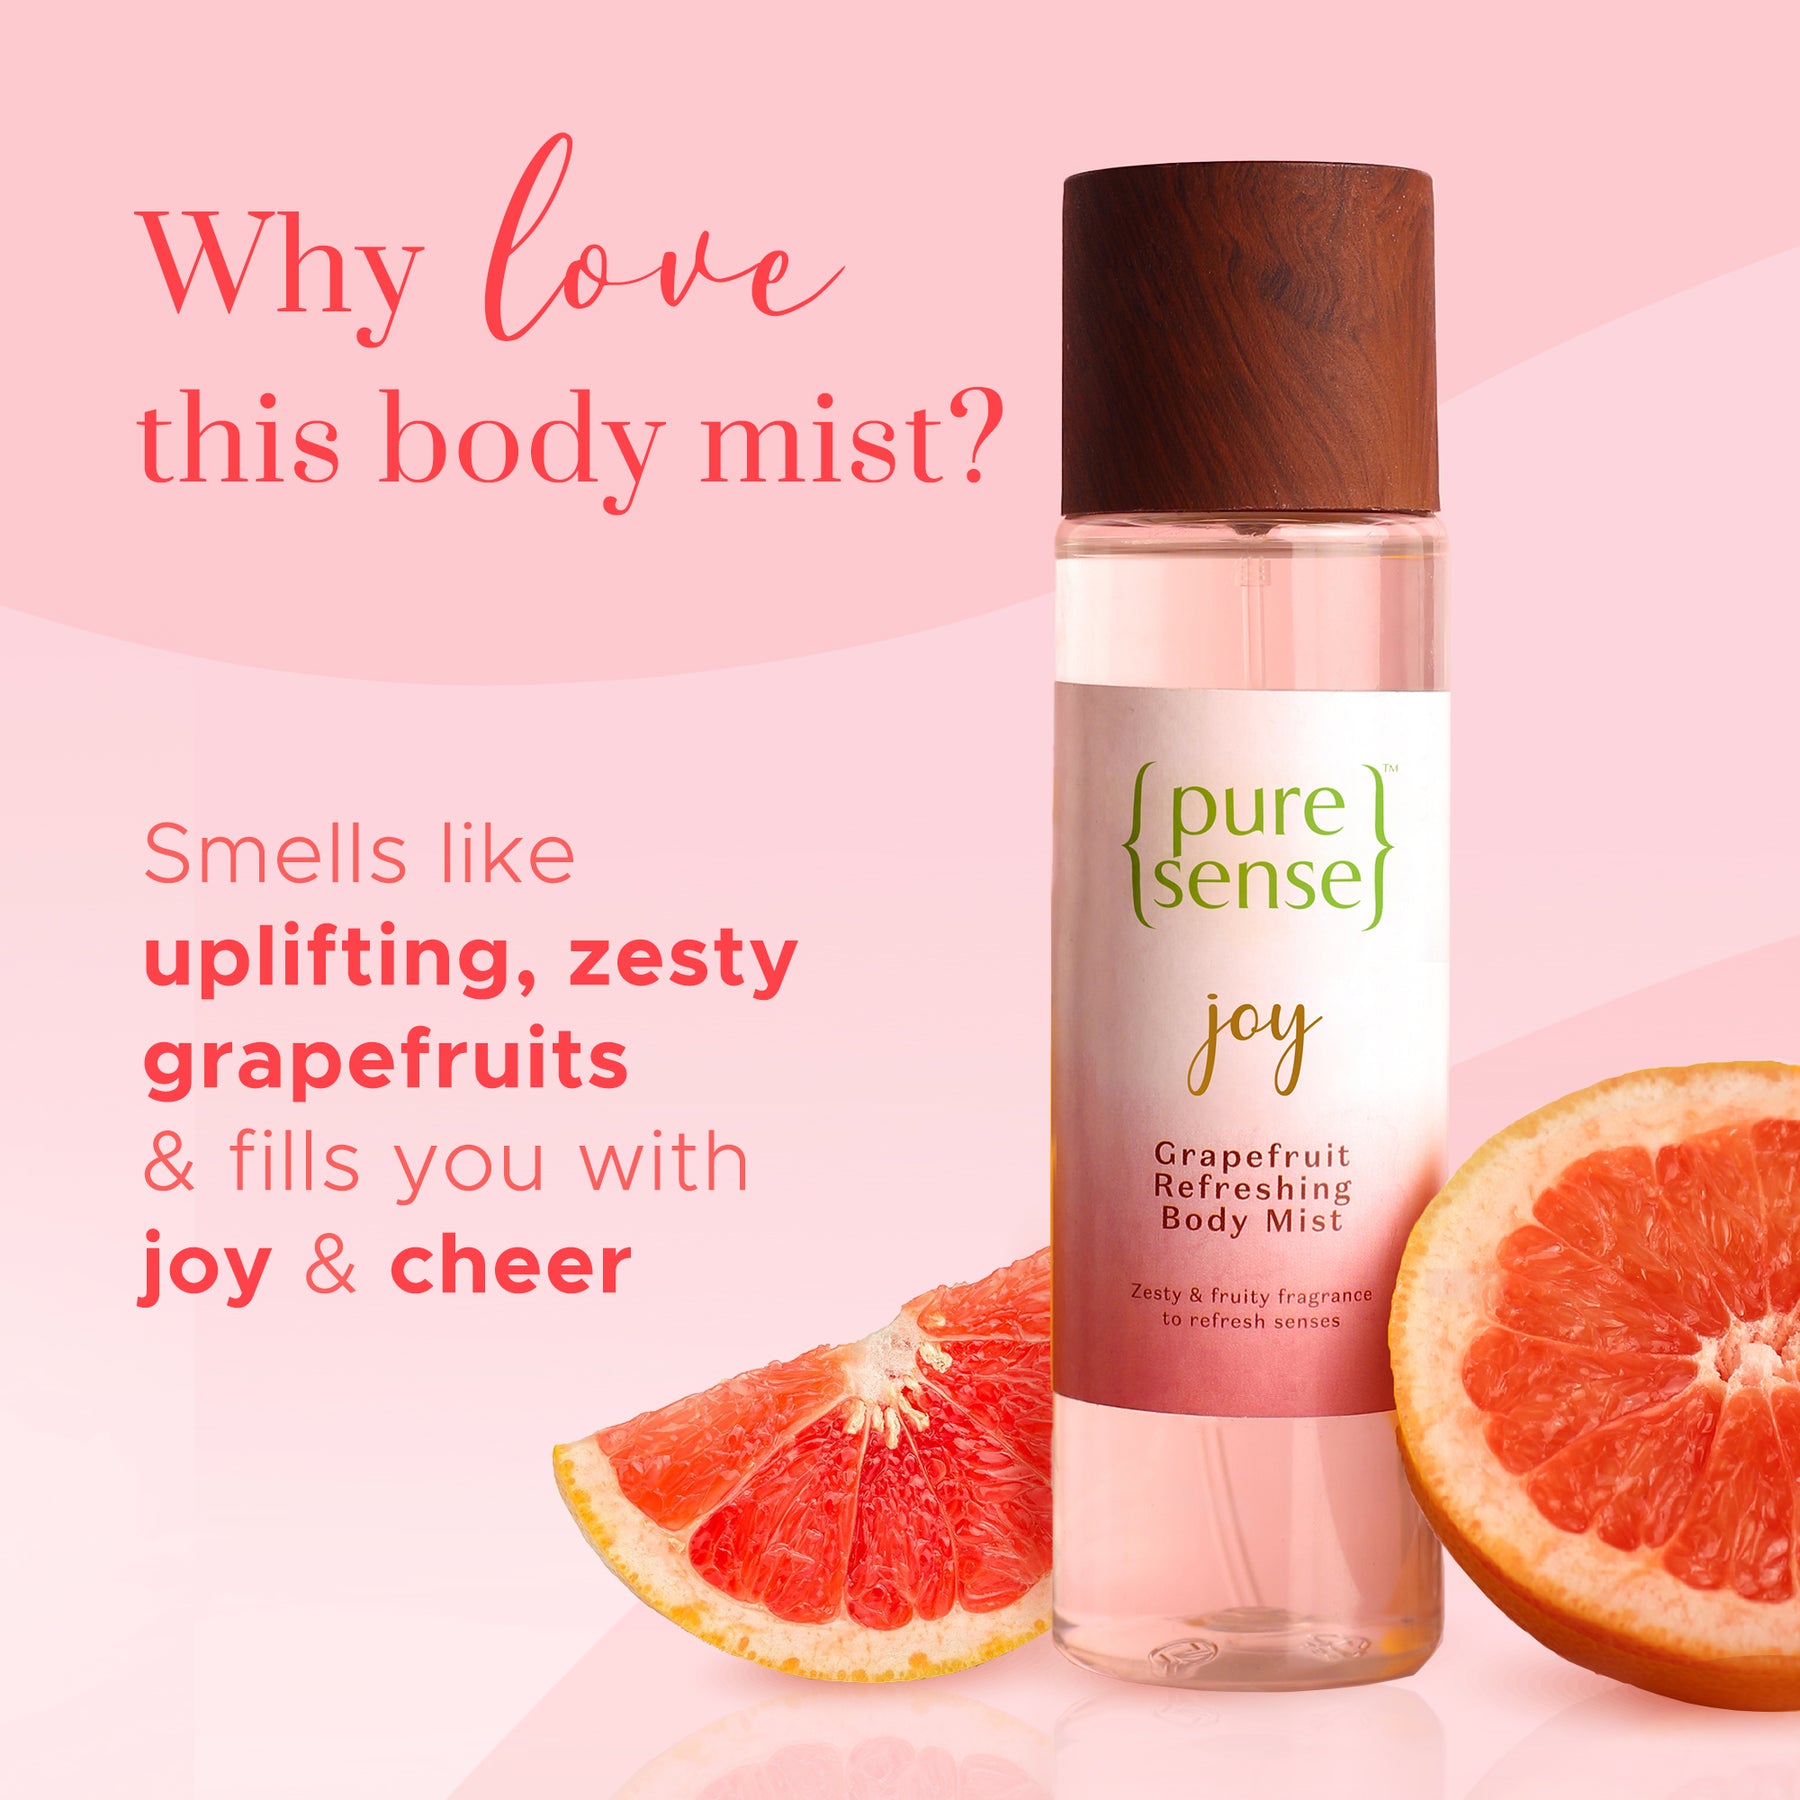 Joy Grapefruit Refreshing Body Mist (Pack of 3) | From the makers of Parachute Advansed | 450ml - PureSense